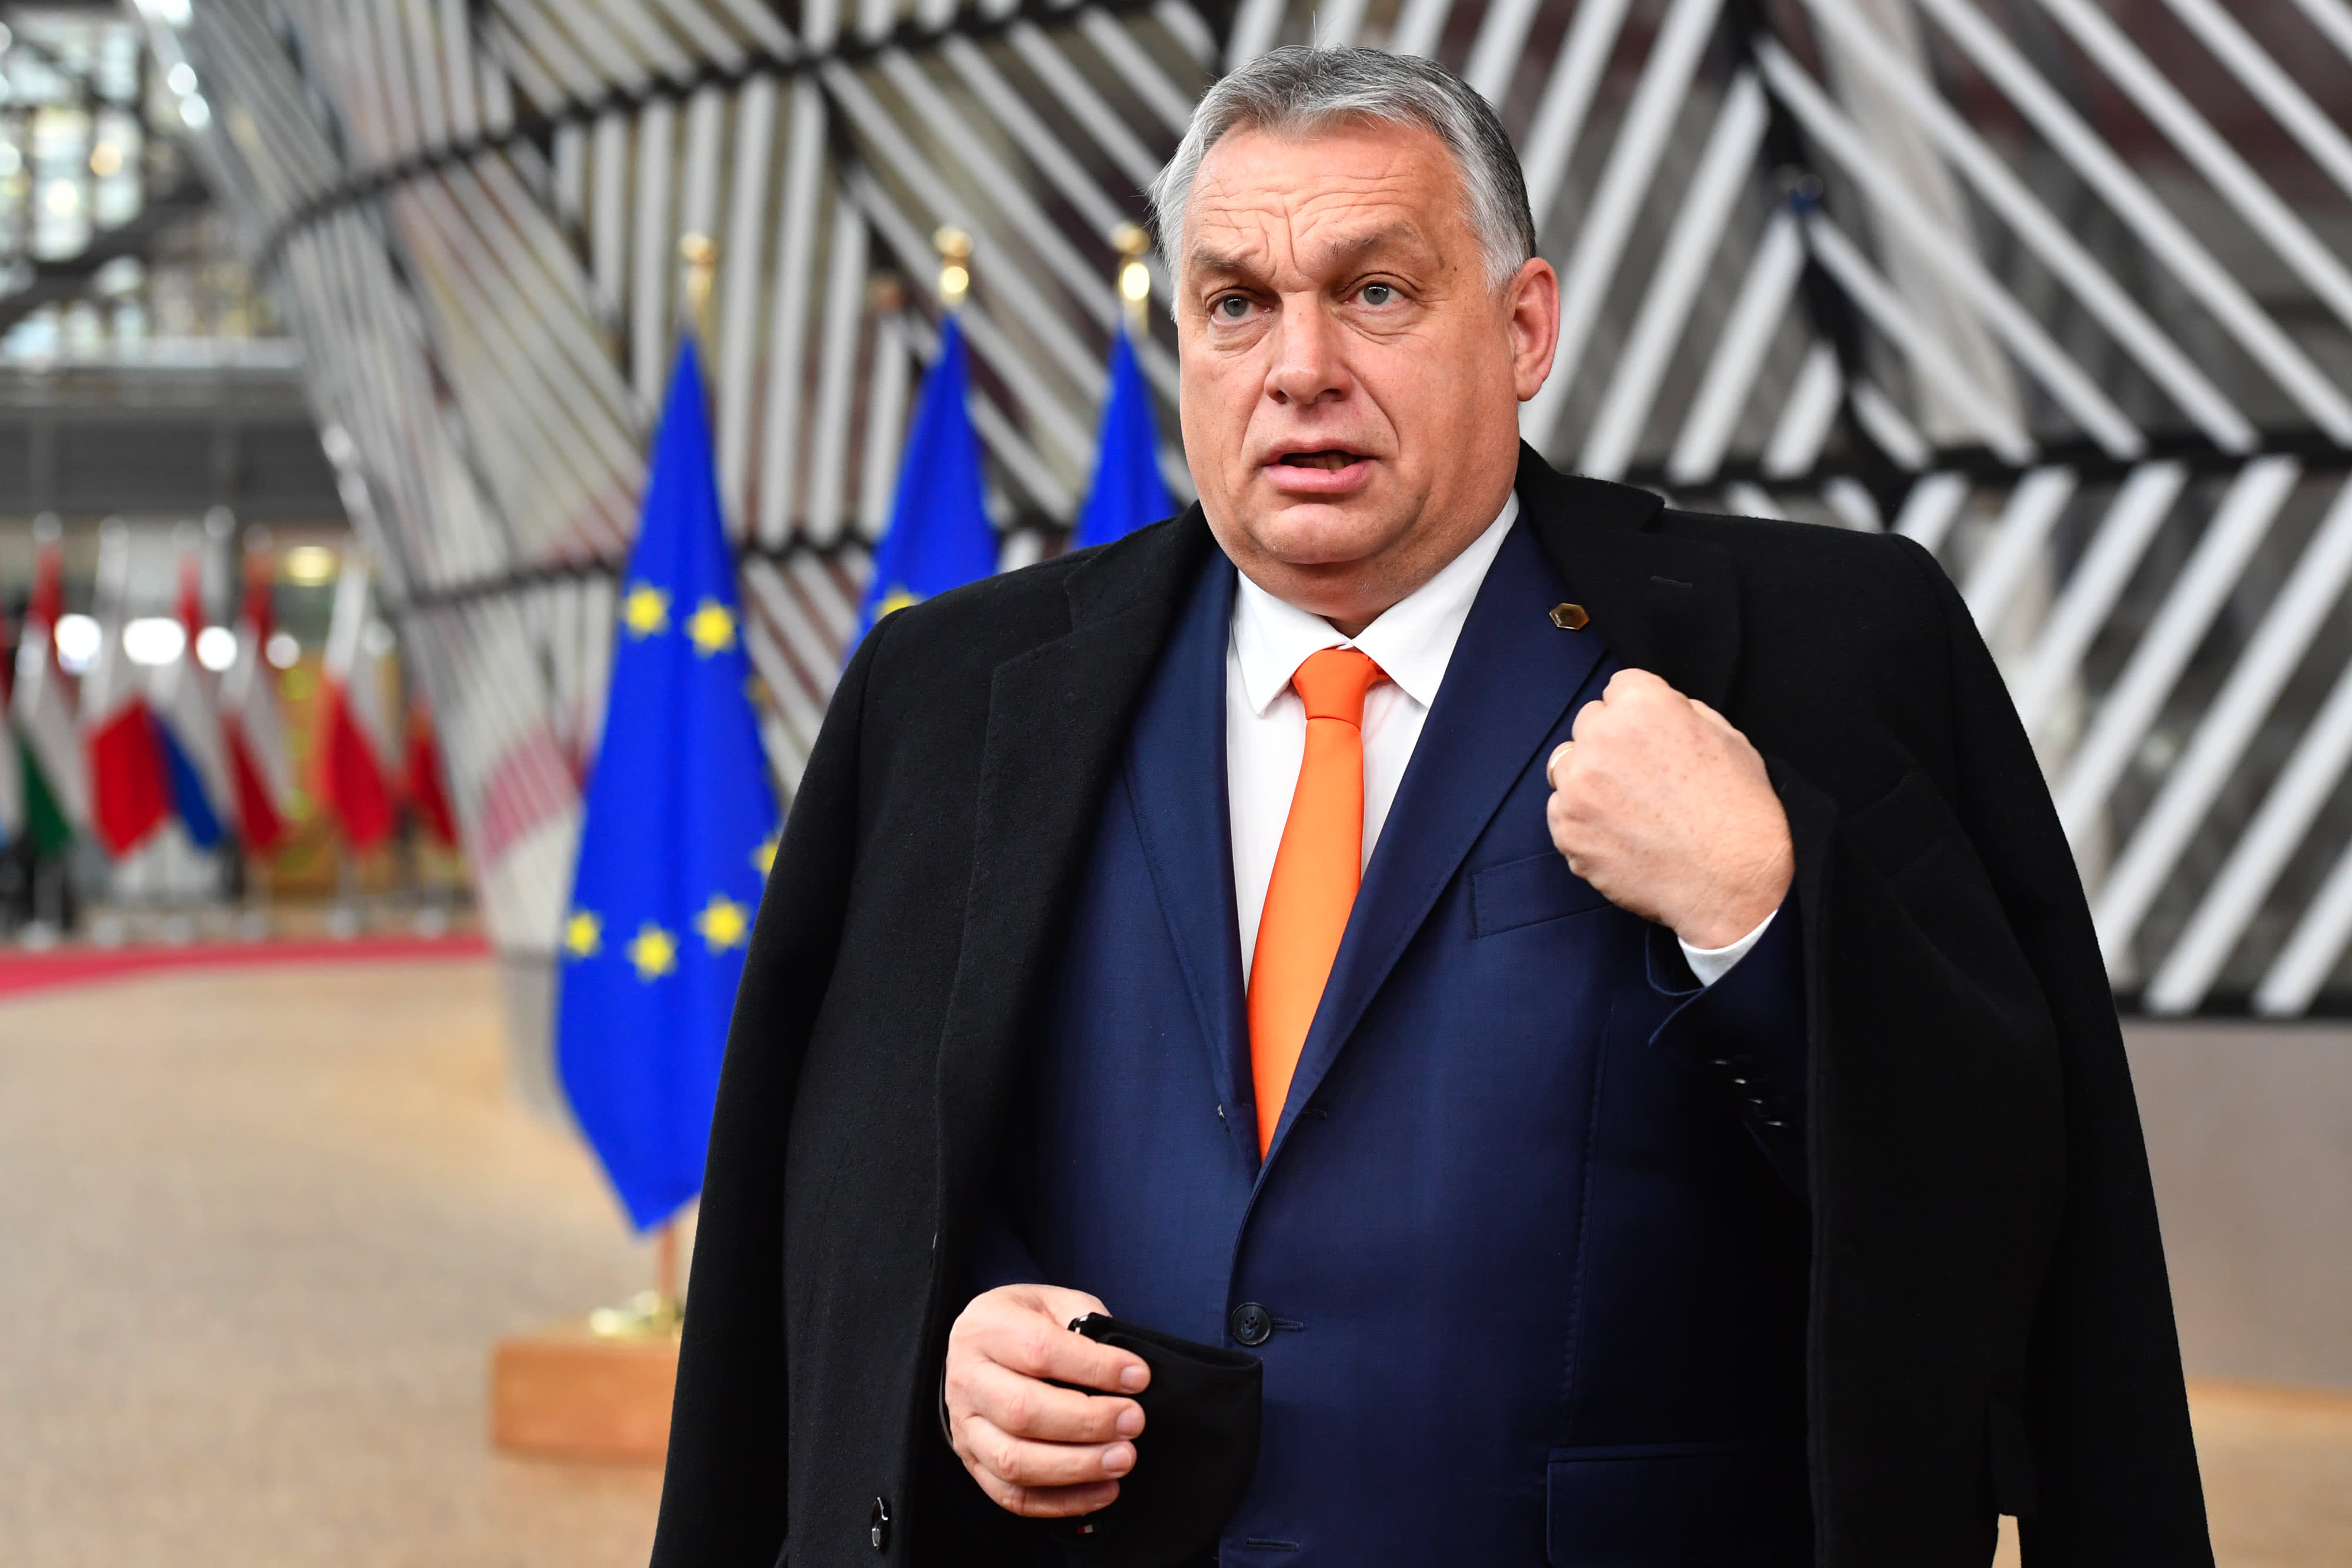 EU leaders finally approve coronavirus stimulus package after Hungary and Poland lift their veto